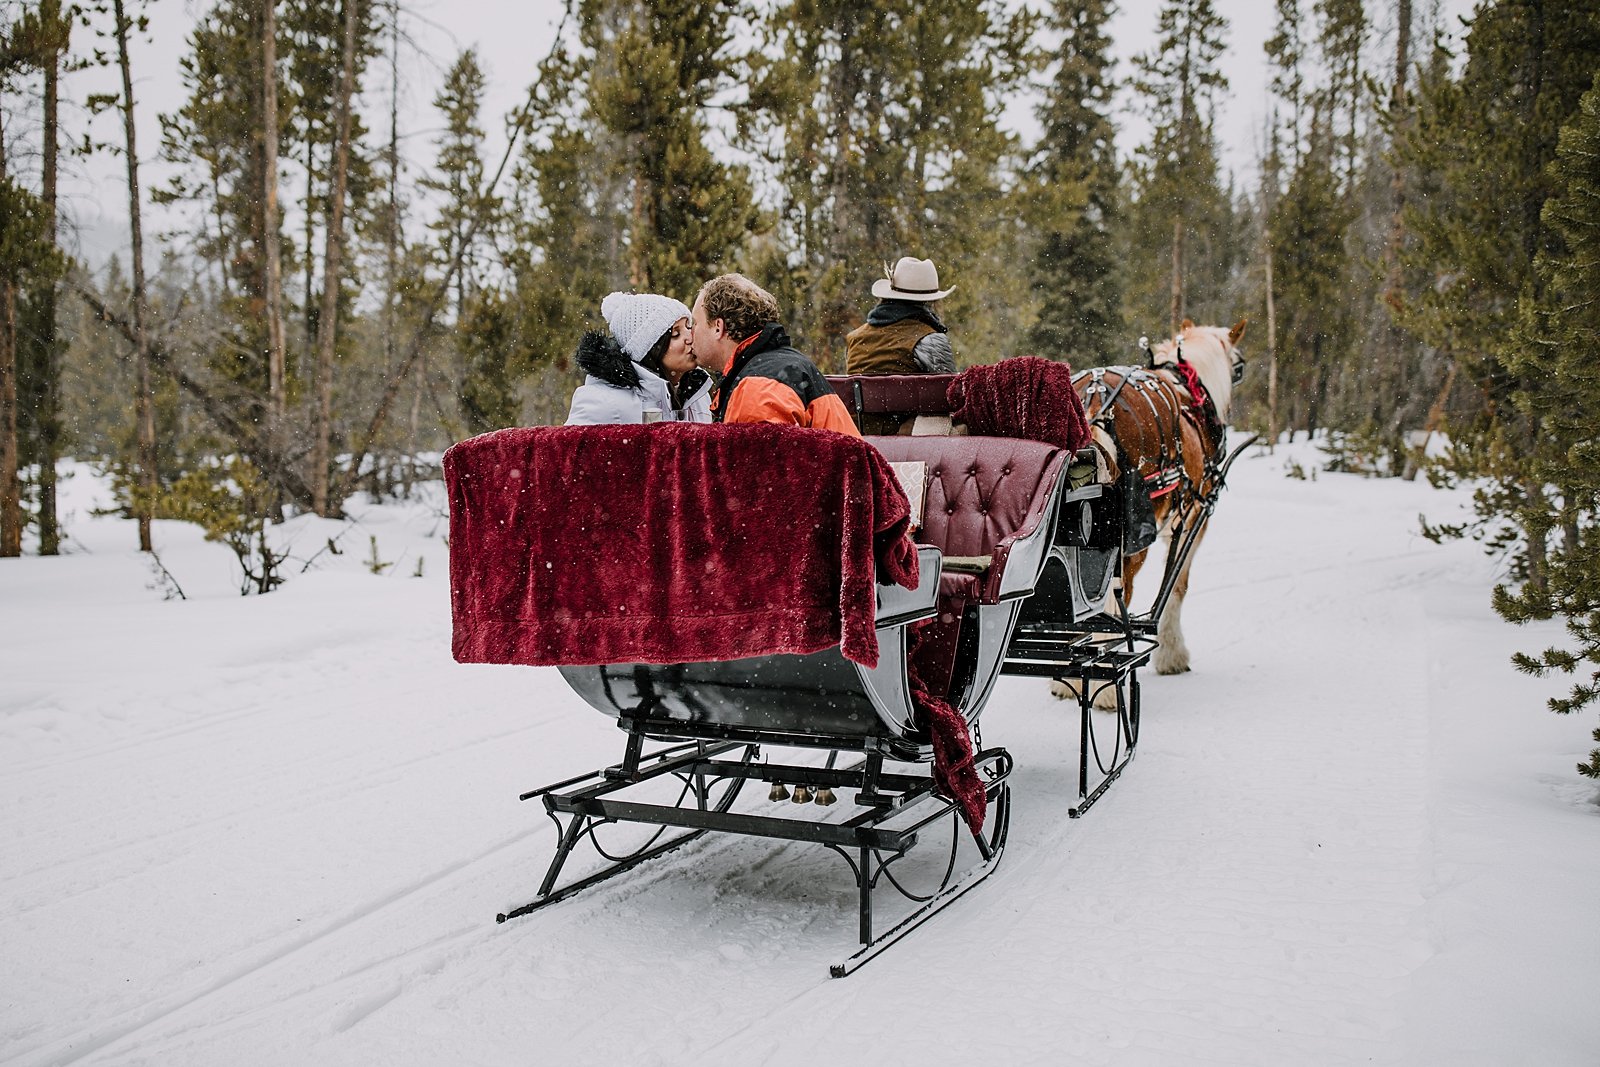 couple kissing on a one horse open sleigh in the woods, open one horse sleigh gliding through the snow, snowy breckenridge spring break proposal, winter bridal jacket, rocky mountain sleigh ride